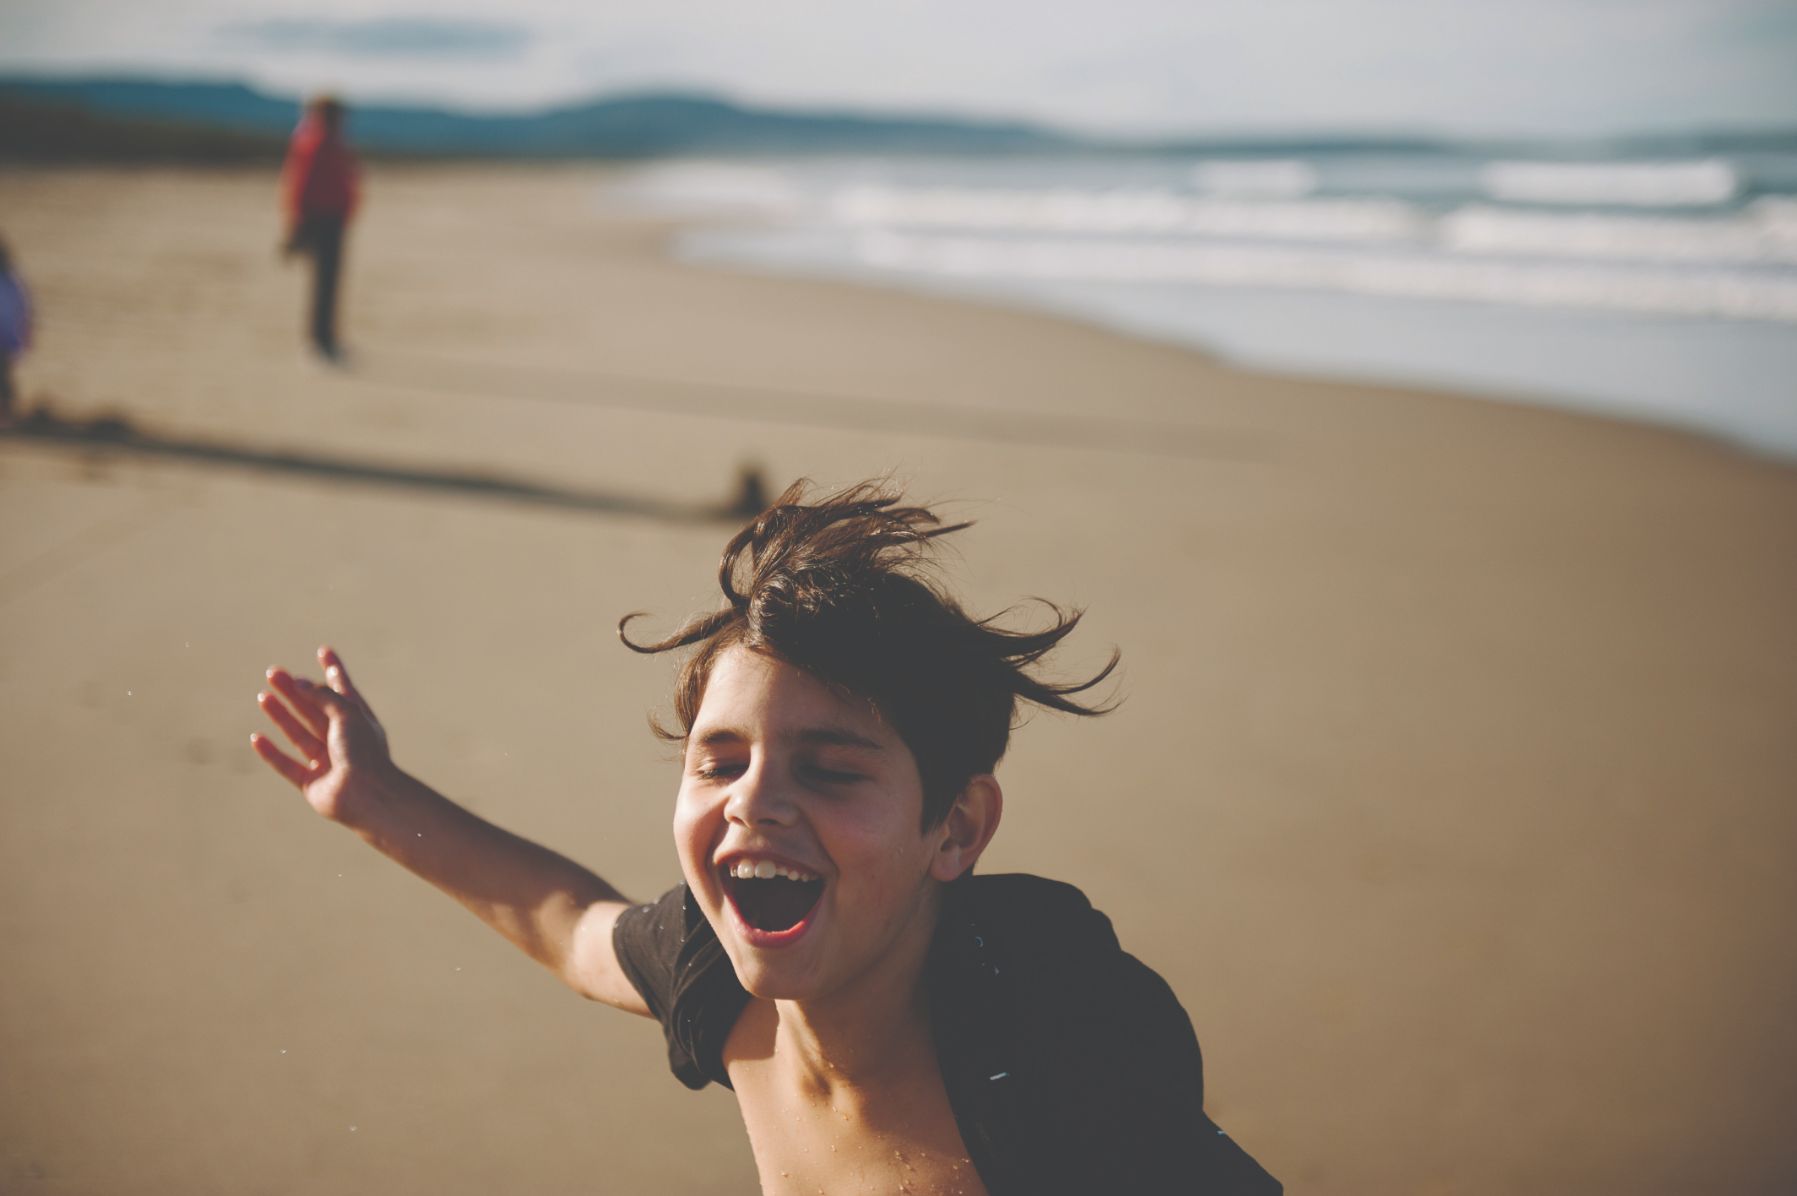 A young child running on a beach having fun